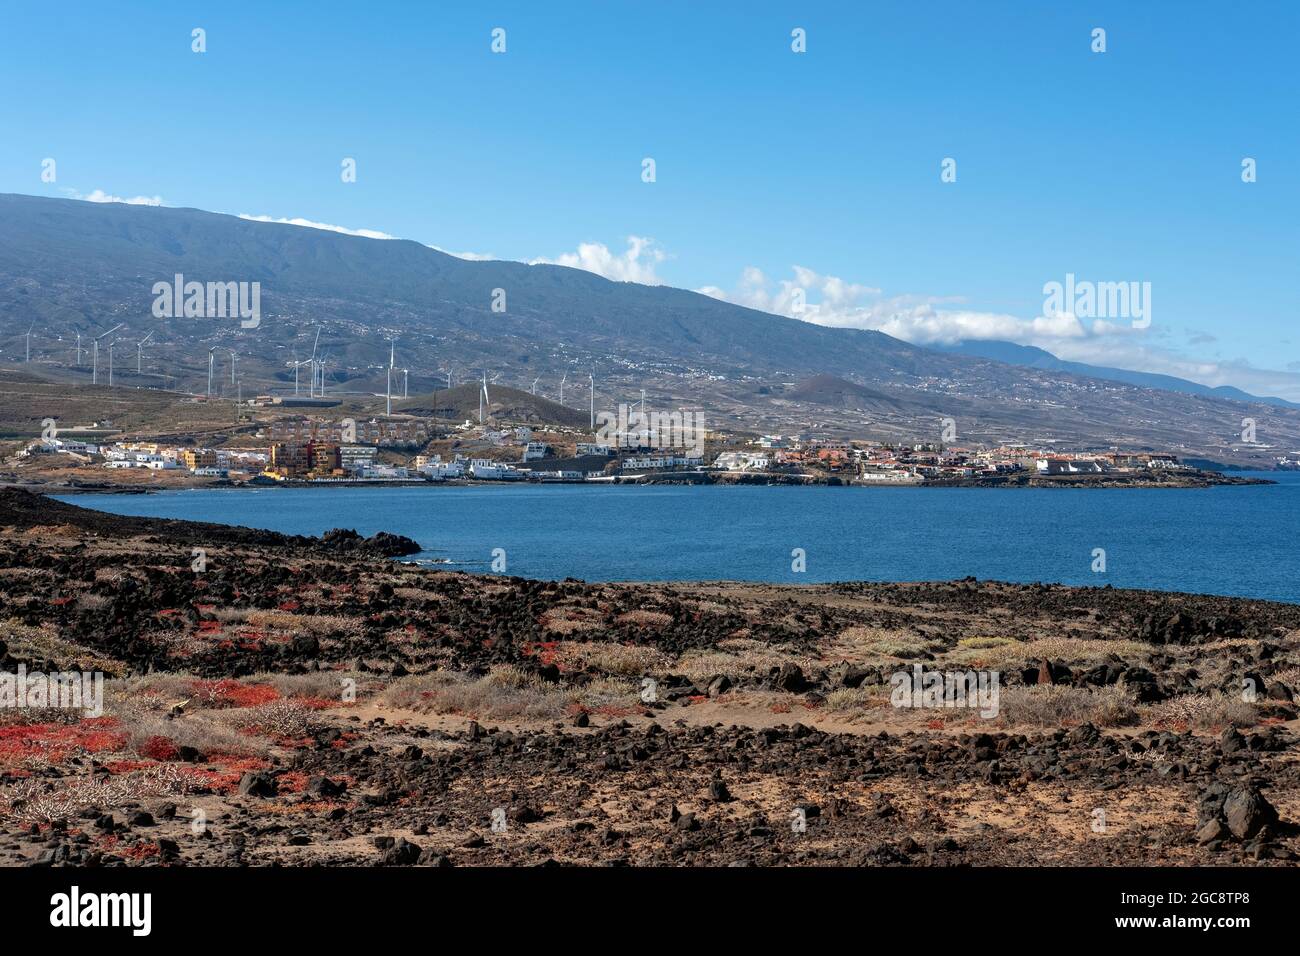 Partial views of Arico municipality from Poris de Abona, with tranquil coastal villages settled on the arid volcanic land and the wind turbines Stock Photo